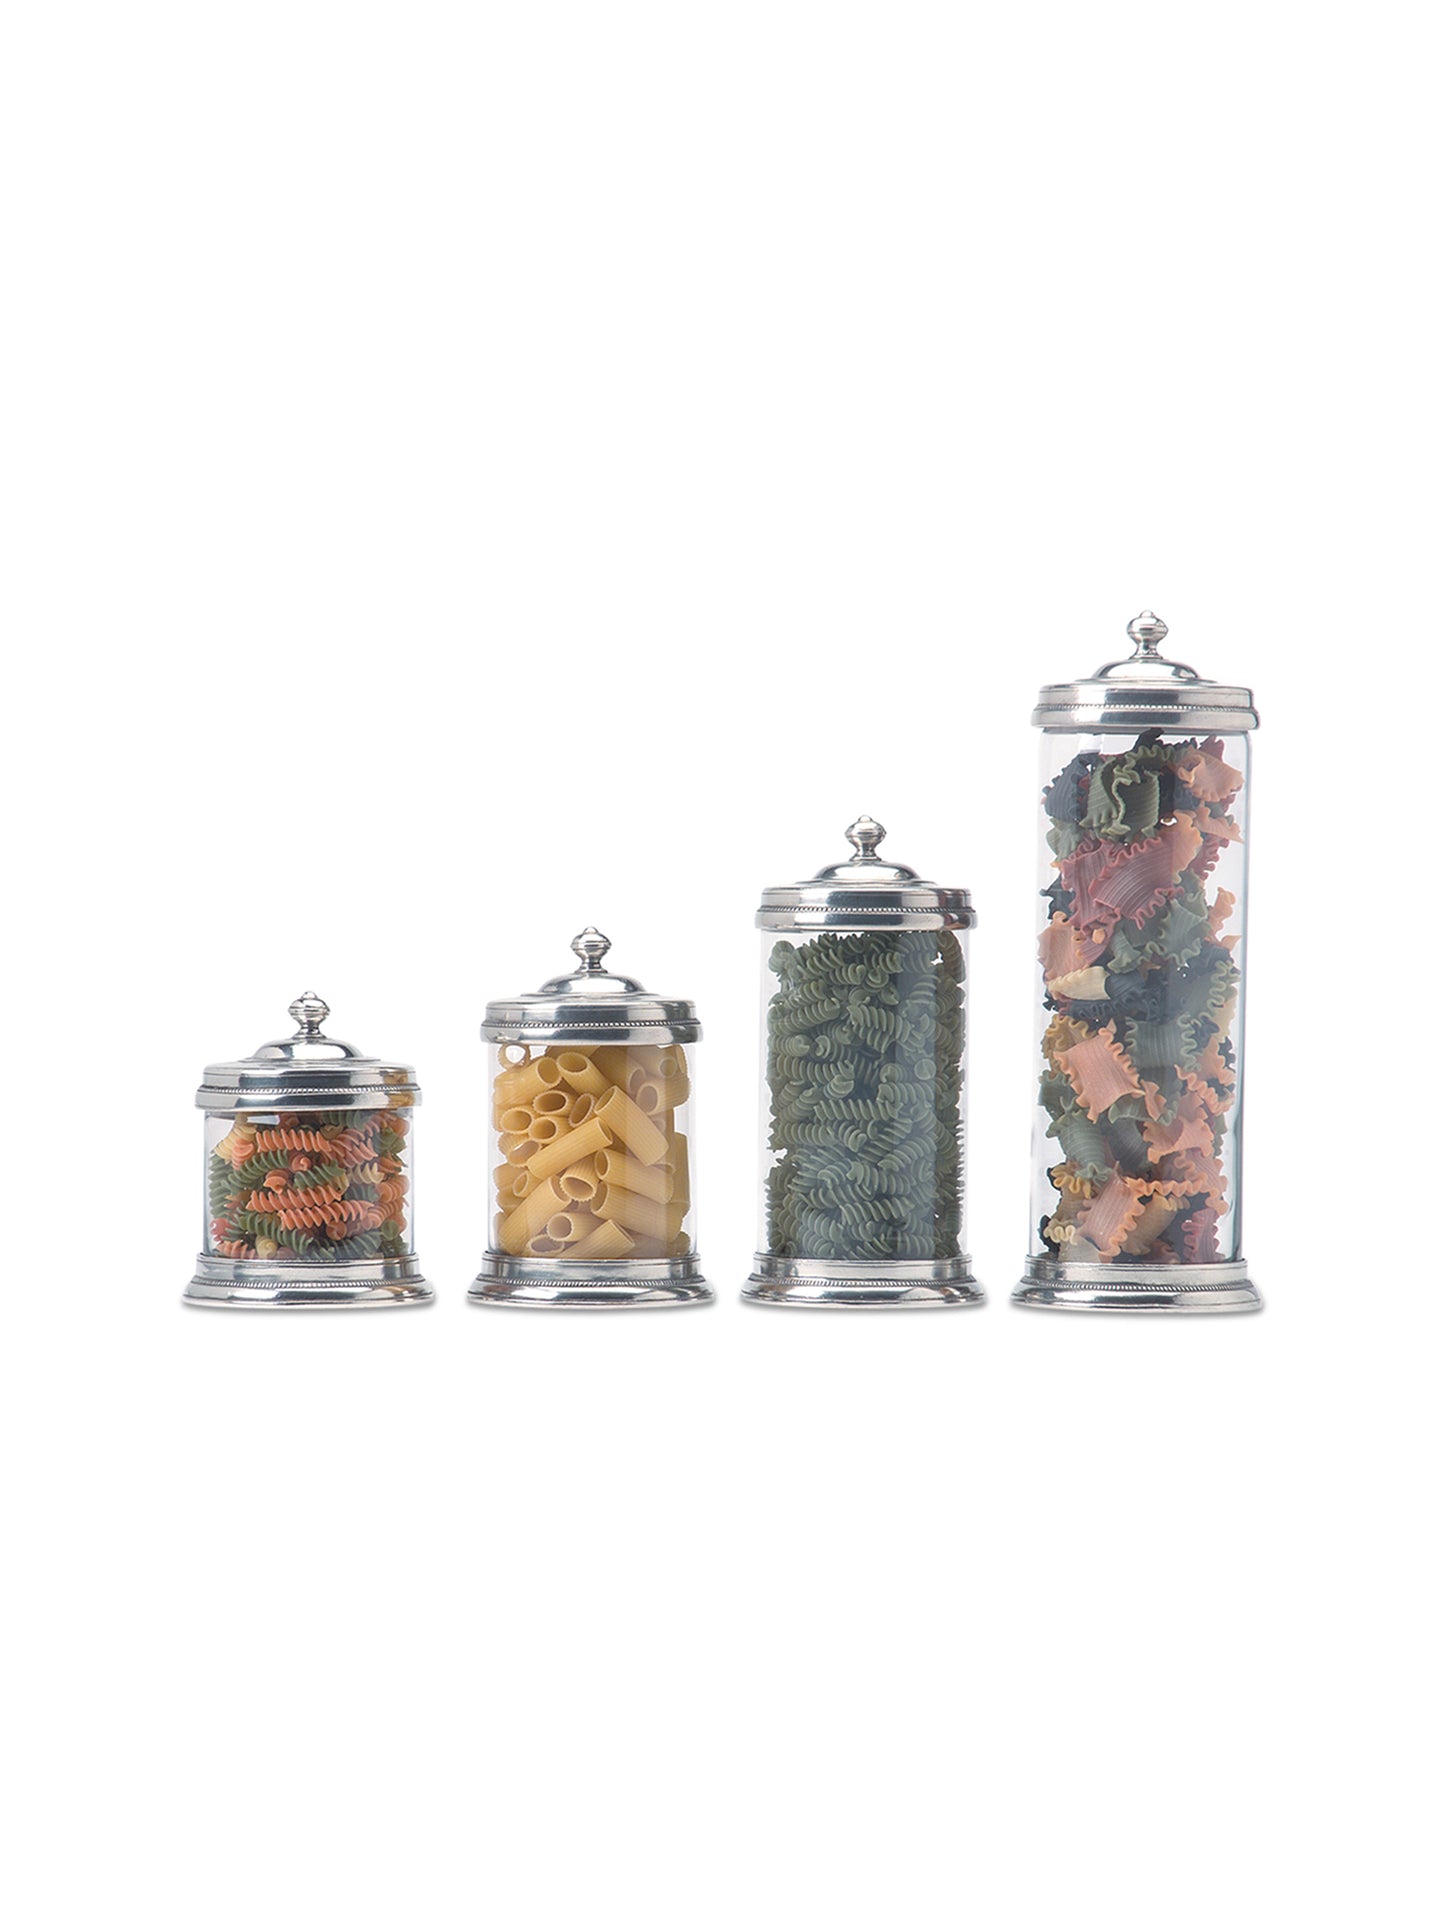 MATCH Pewter Glass Canisters